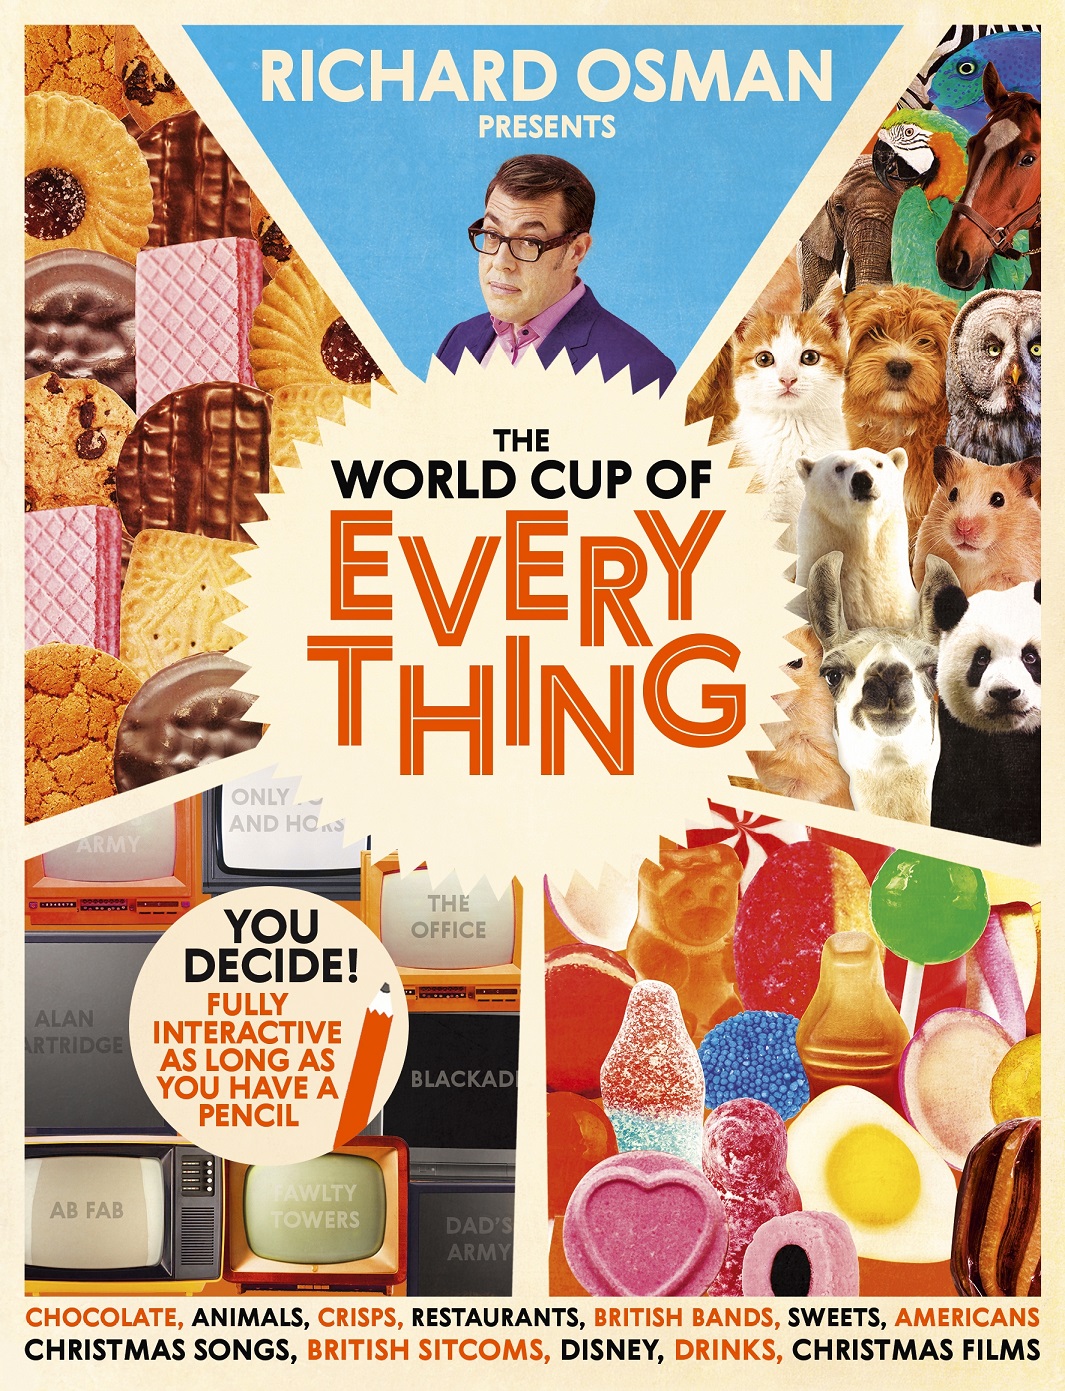 Richard Osman's The World Cup of Everything